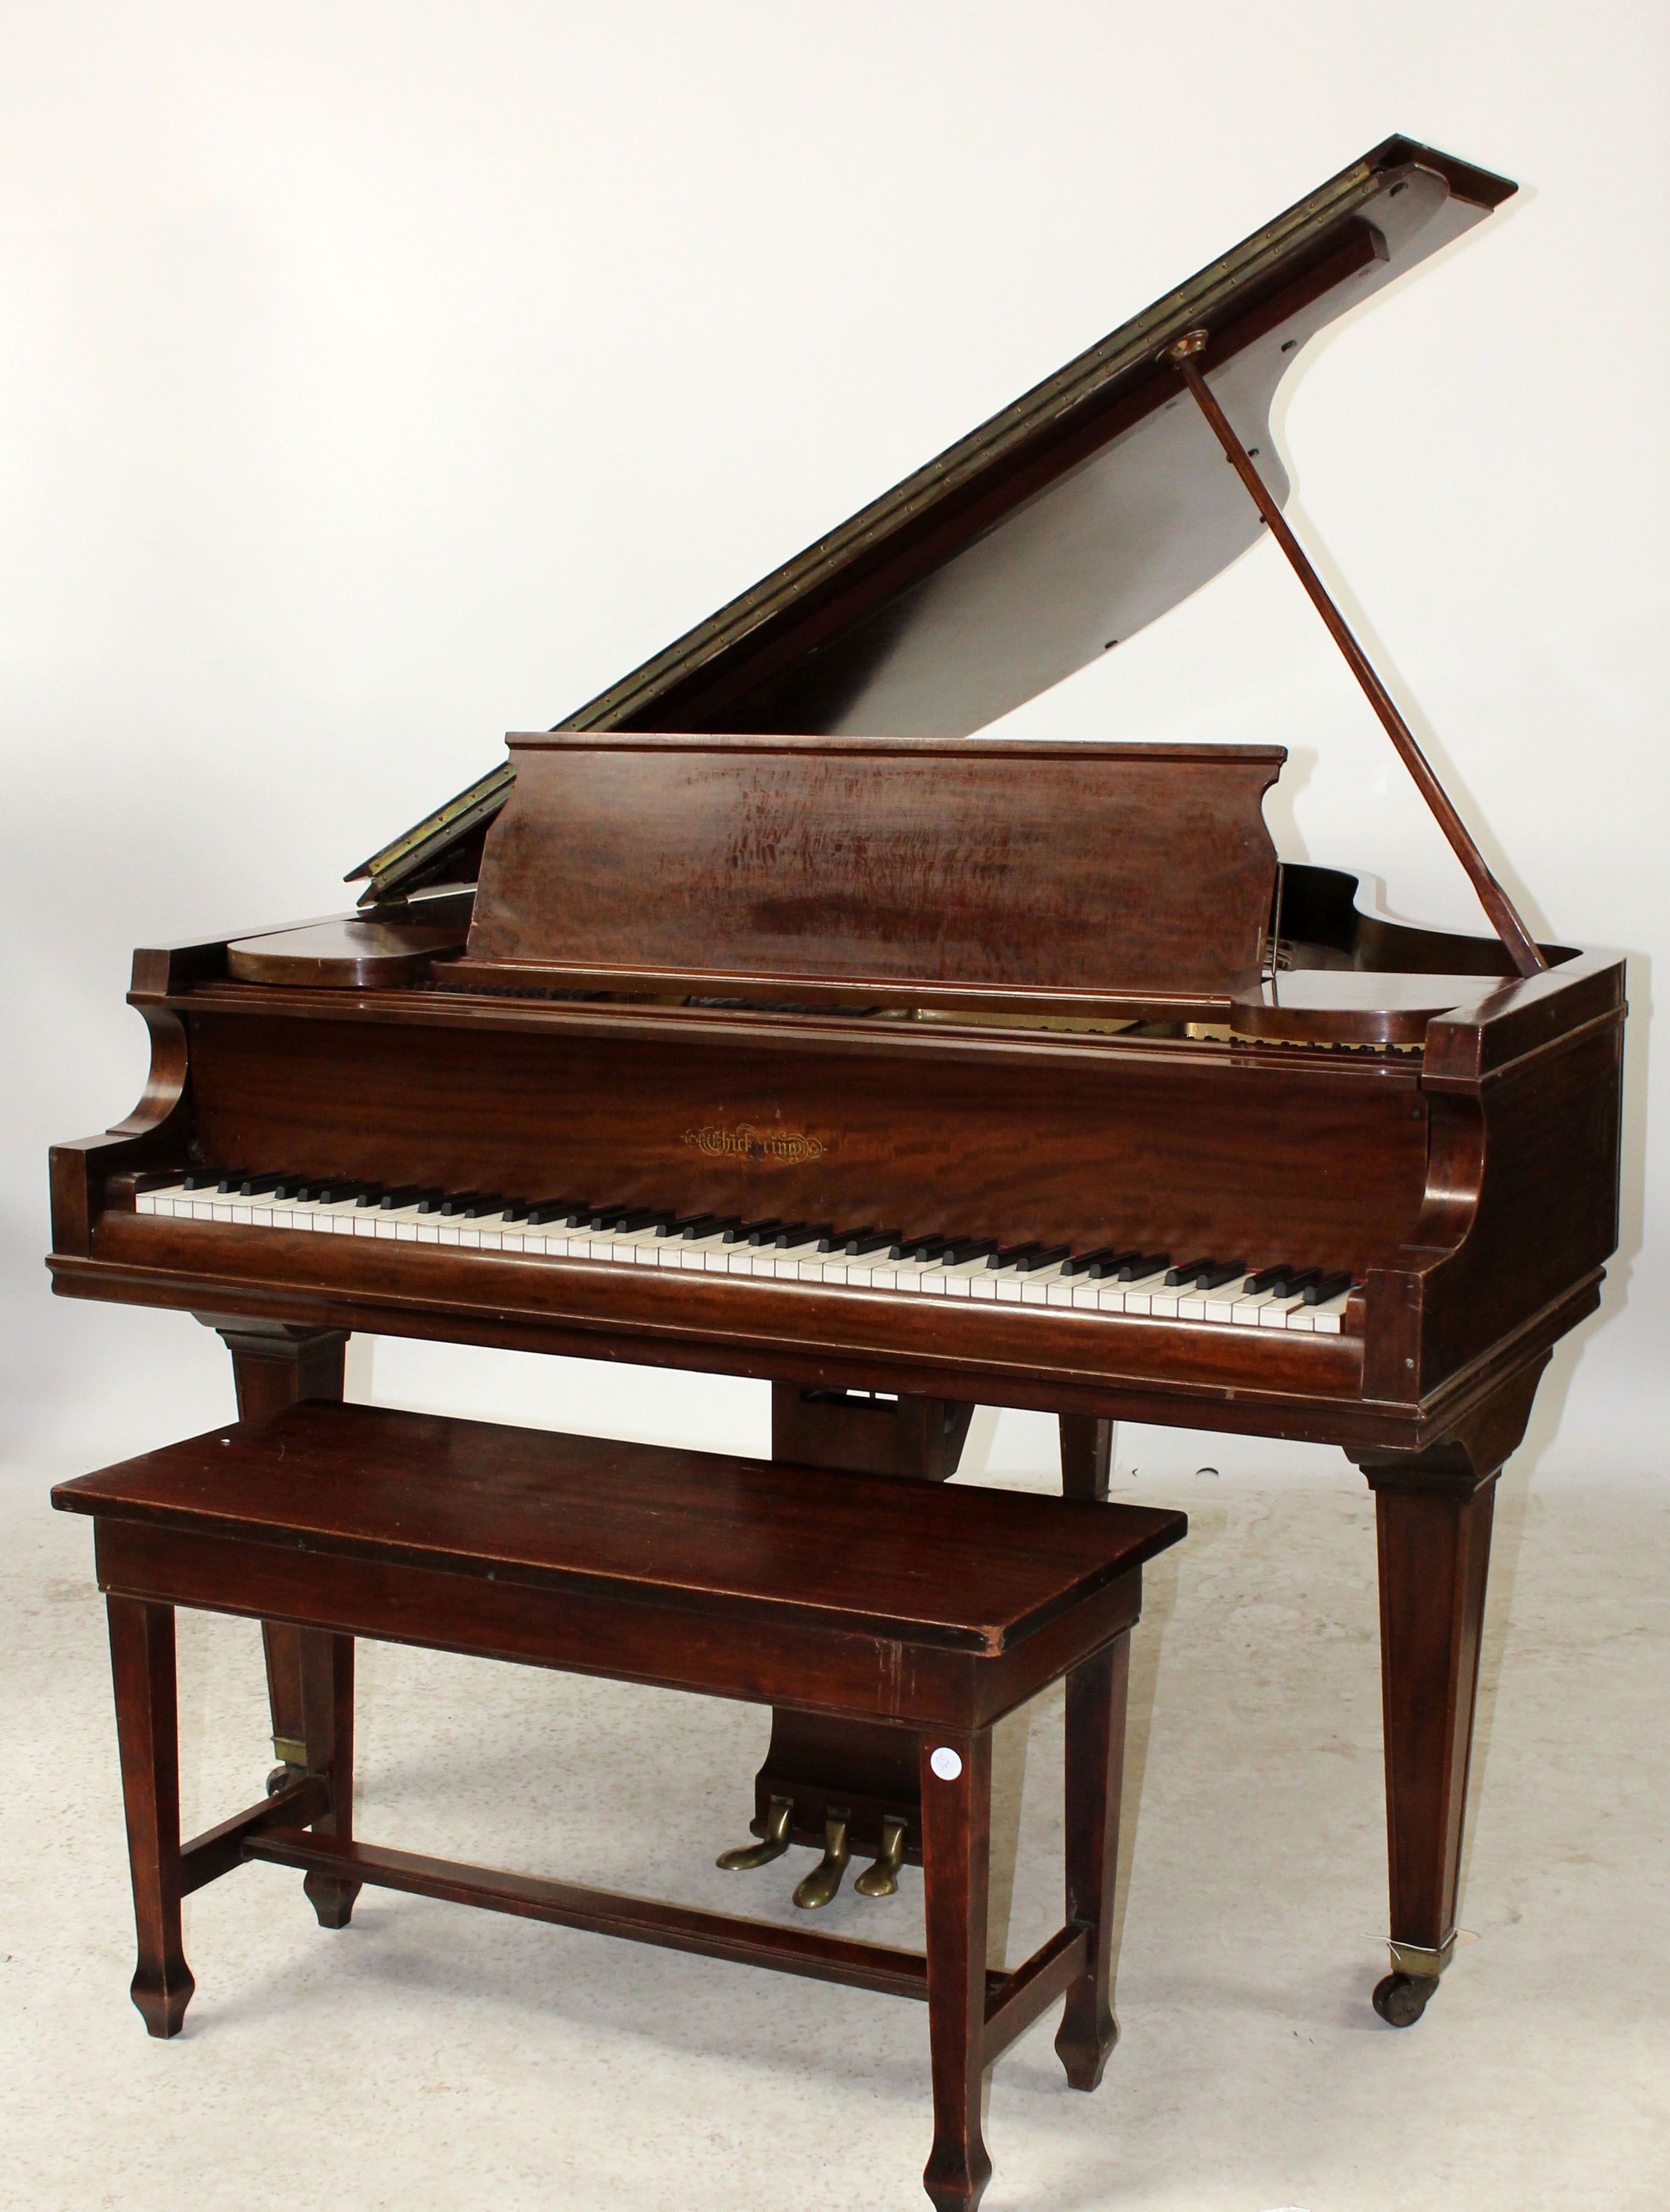 Chickering baby grand piano in mahogany. With bench. Serial no. 130629.